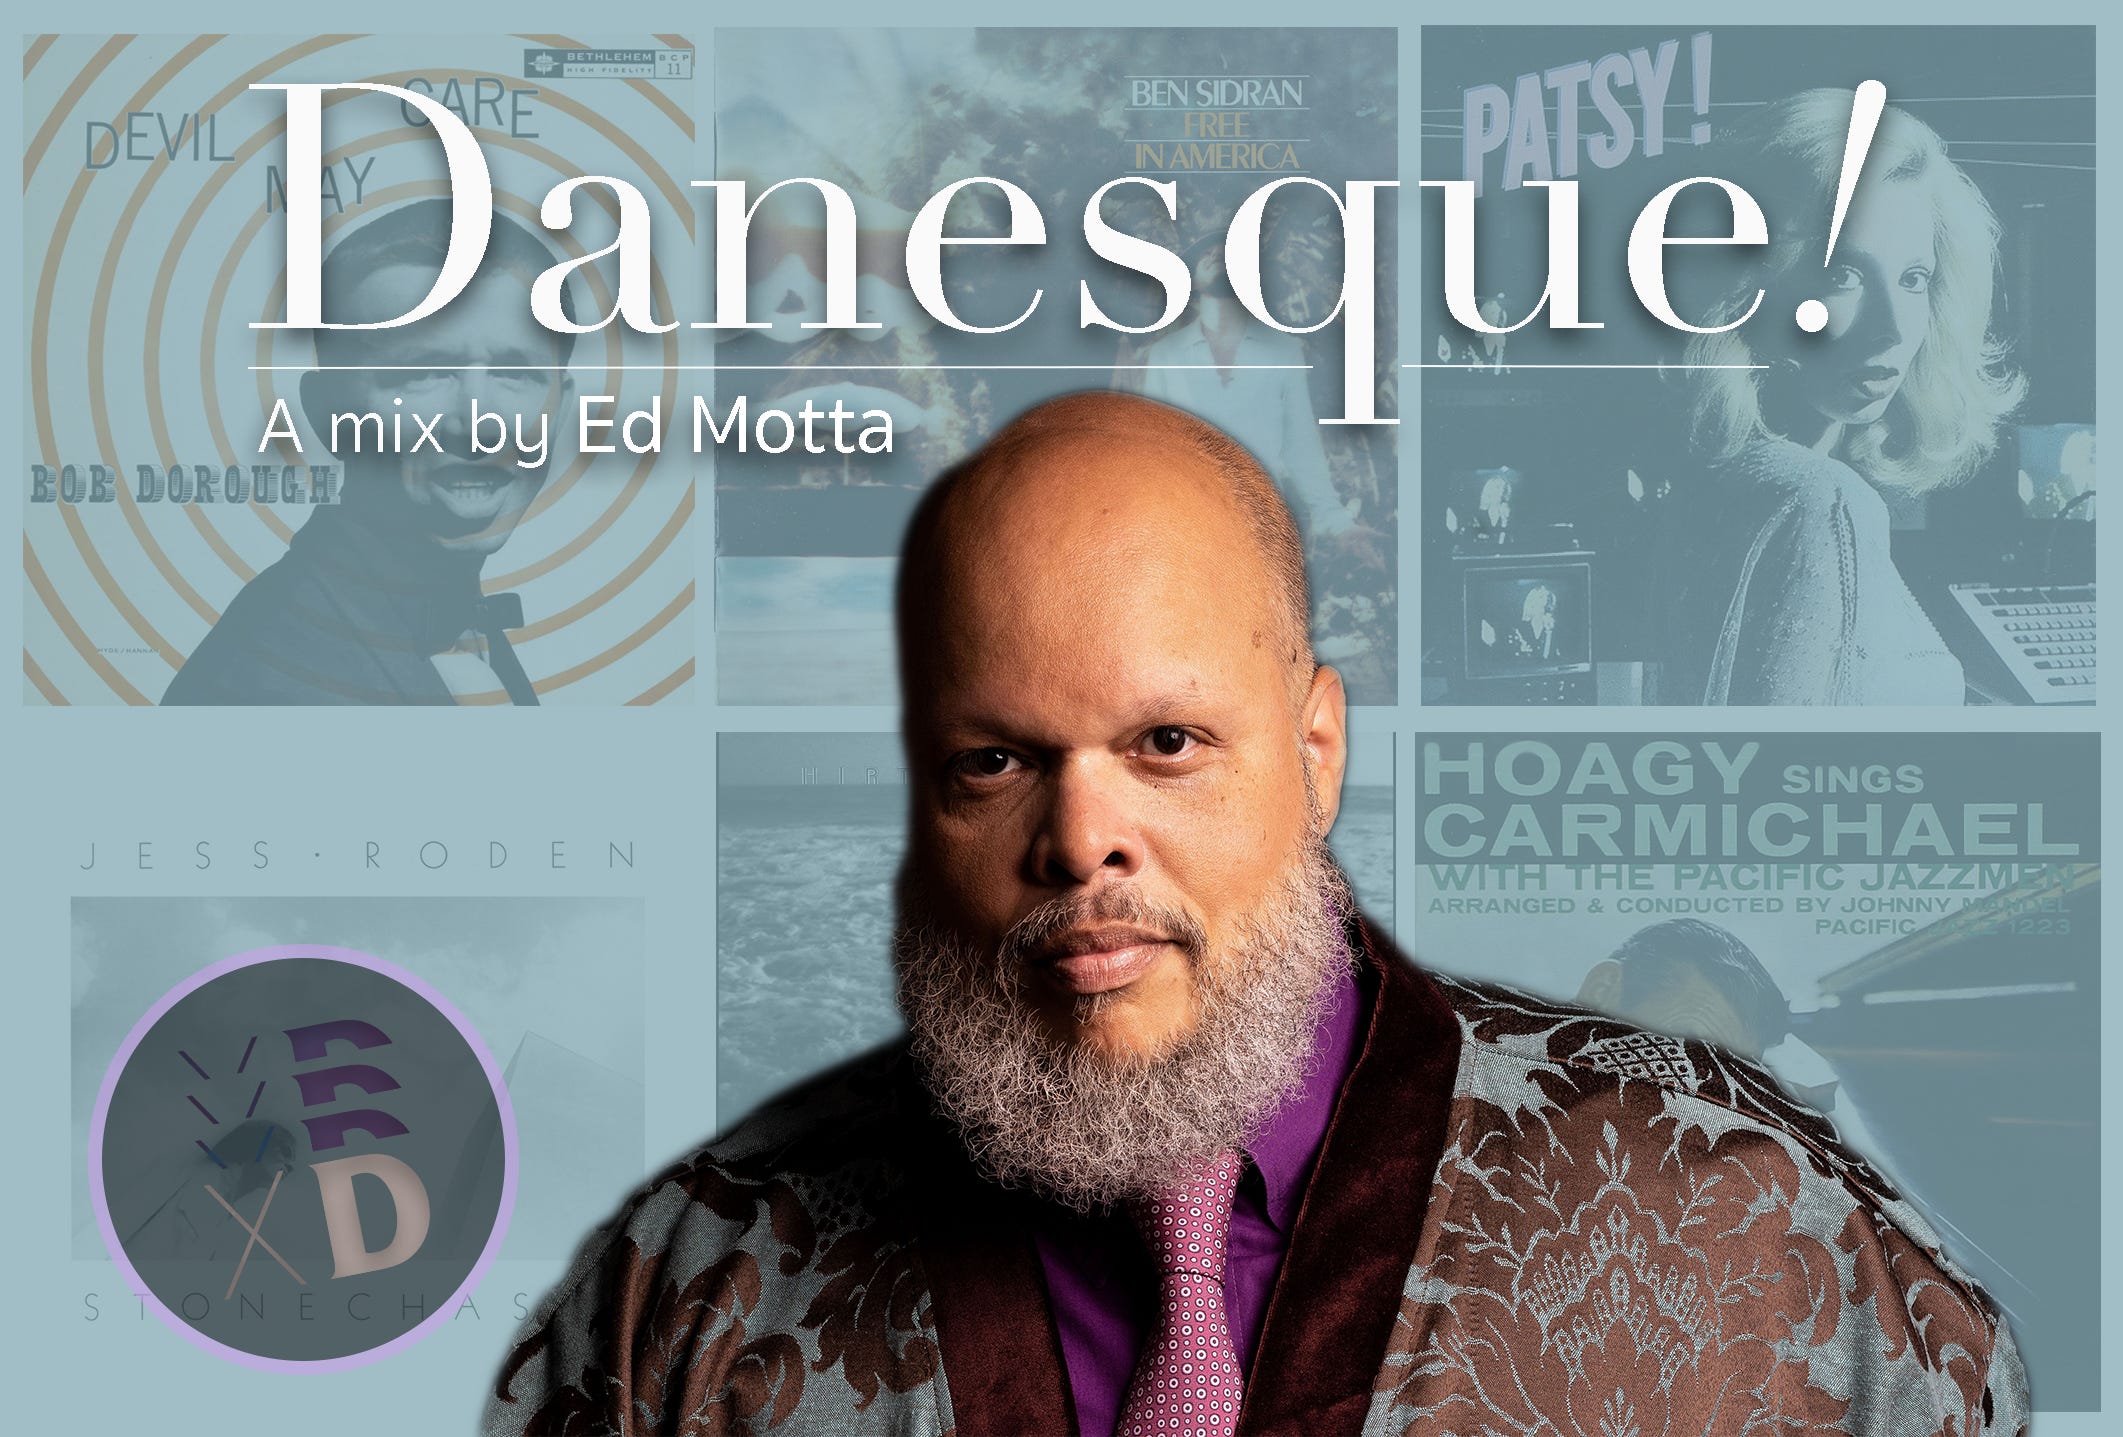 Danesque: a mix by Ed Motta - by Jake Malooley